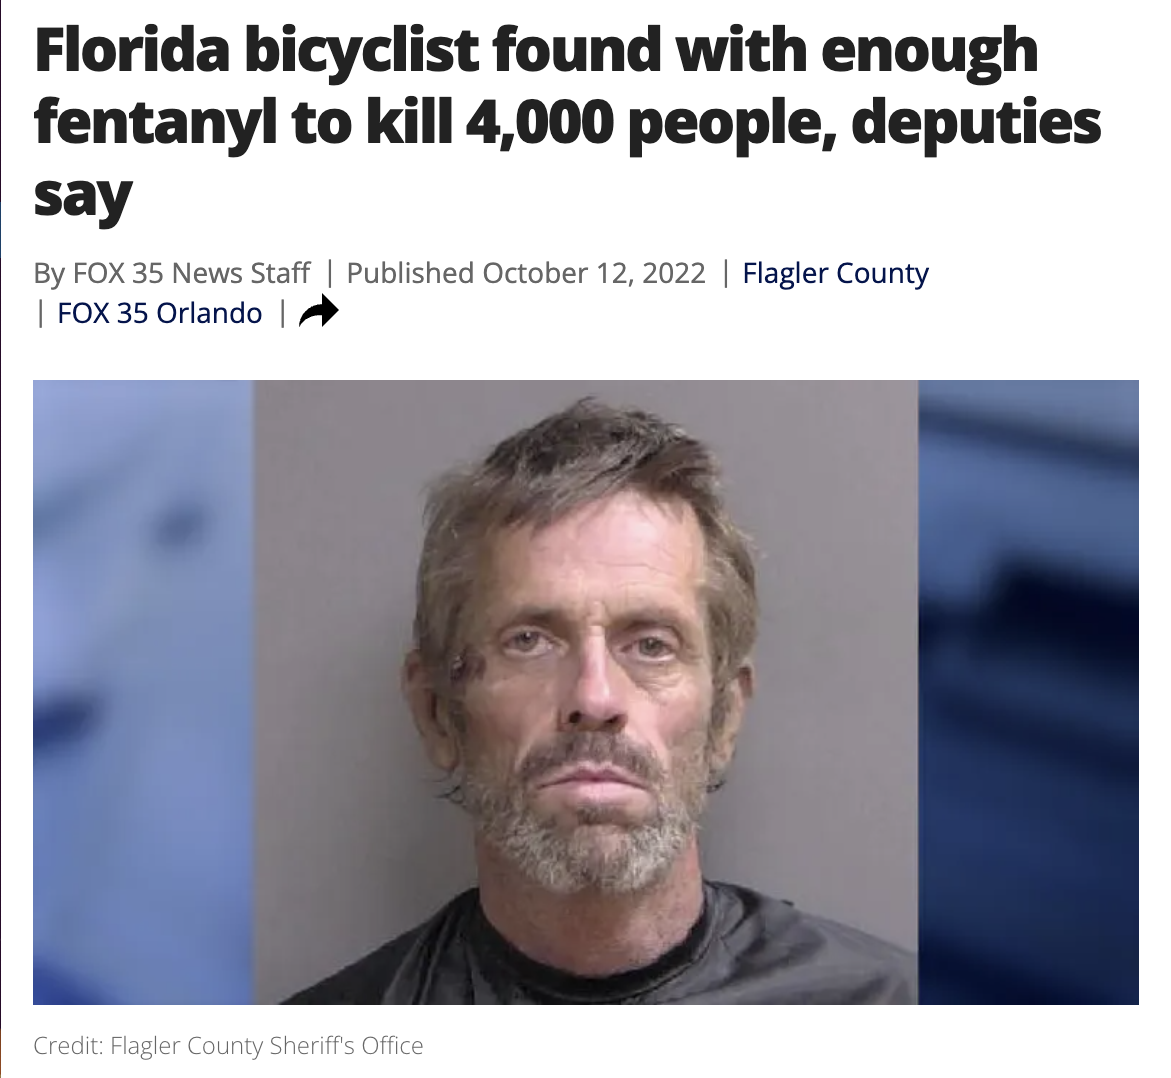 Best of Florida Man 2022 - photo caption - Florida bicyclist found with enough fentanyl to kill 4,000 people, deputies say By Fox 35 News Staff | Published | Flagler County | Fox 35 Orlando | Credit Flagler County Sheriff's Office